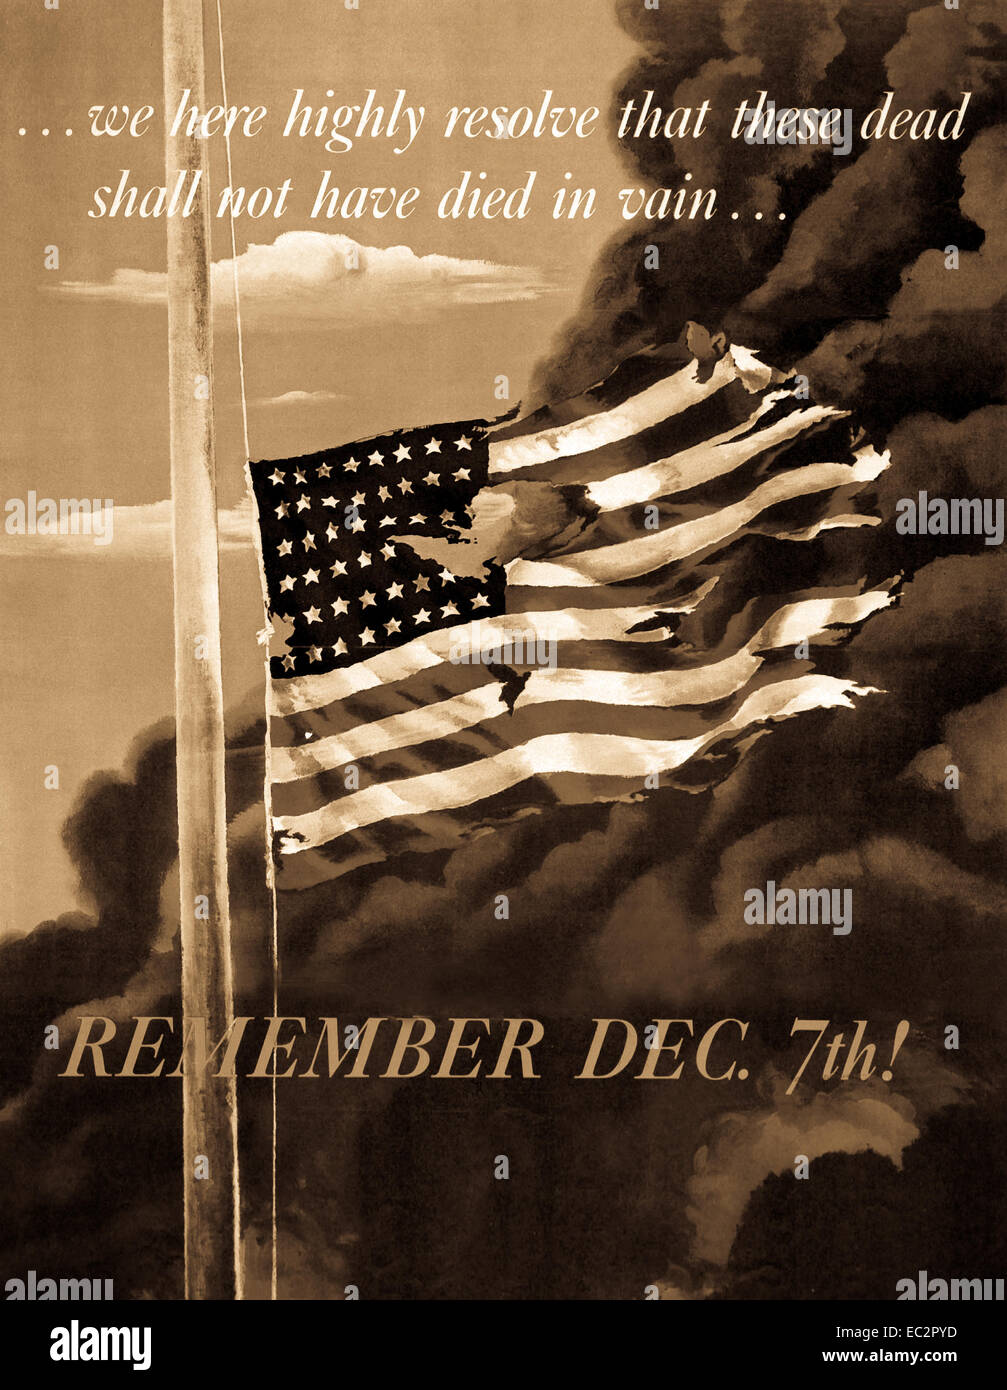 We here highly resolve that these dead shall not have died in vain...Remember Dec. 7th! 1942. Painting by Allen Saalberg. Stock Photo